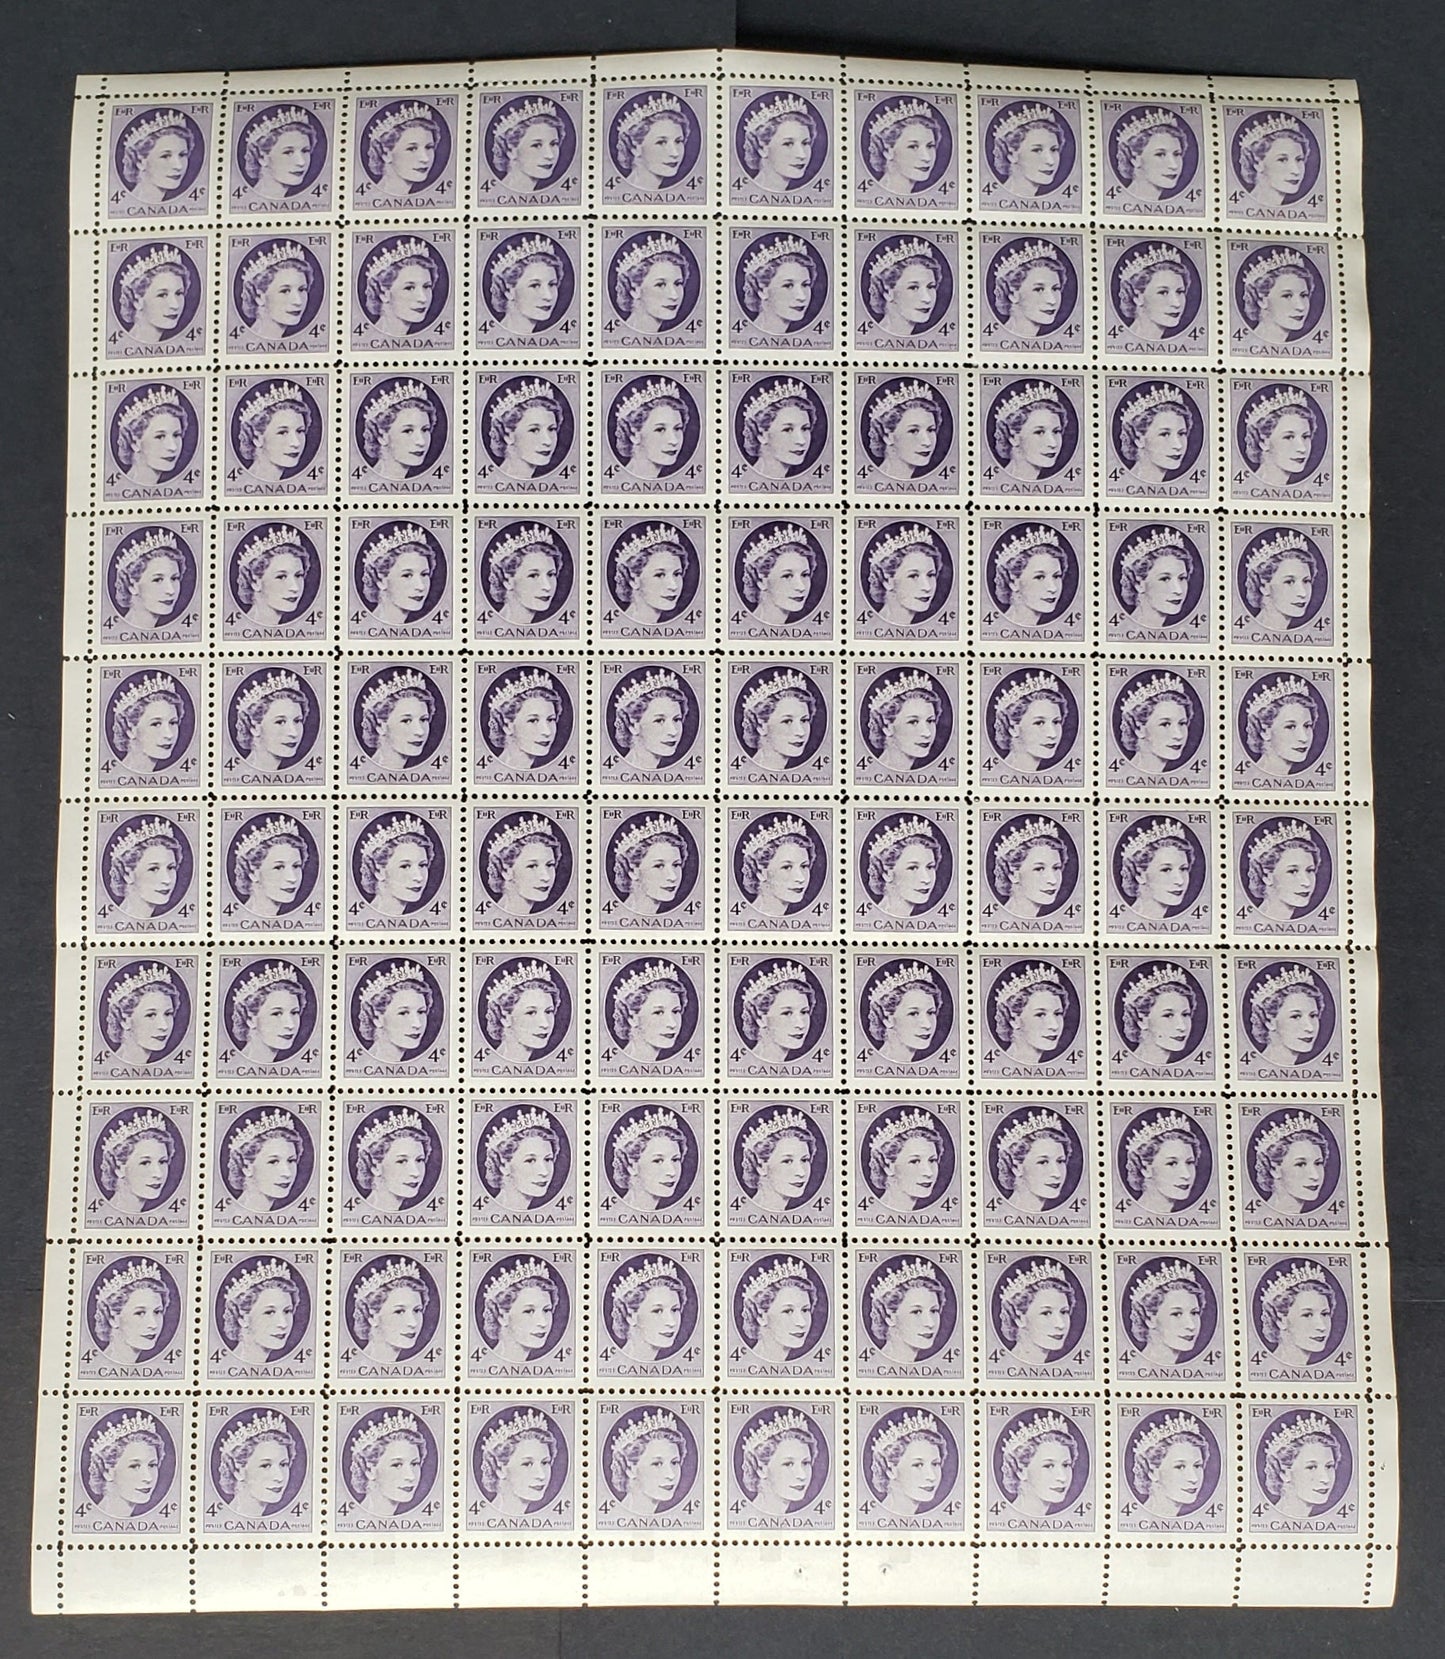 Lot 221 Canada #340p 4c Violet, 1954 Queen Elizabeth 2 - Wilding Portrait Issue, A VFNH Winnipeg Tagged Full Unfolded Lower Center Pane Of 100 On DF Smooth Paper. Extremely Well Centered For This.